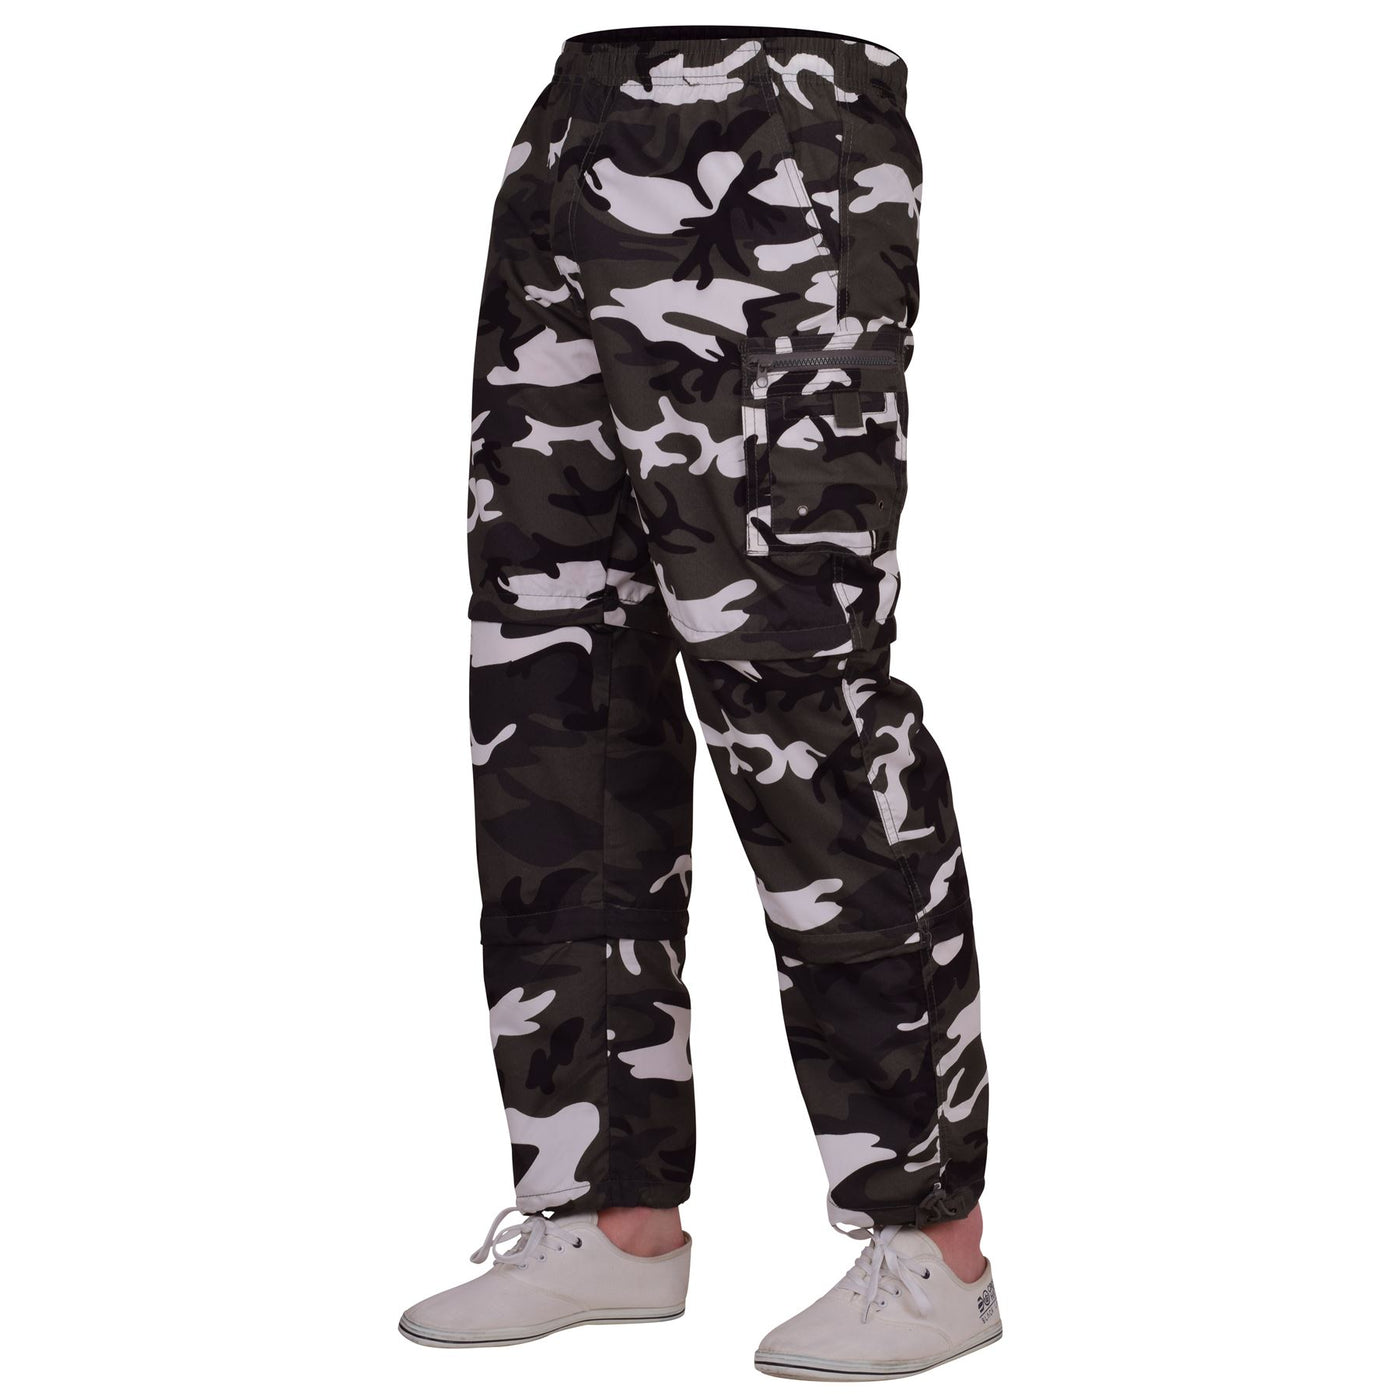 52_DNM Mens Combat Camouflage Cargo Loose Fitting Elastic Waist Pants | Military Tactical Trousers Zip Off Shorts Zip-Off 3/4's with Zipped Pockets and Adjustable Hem